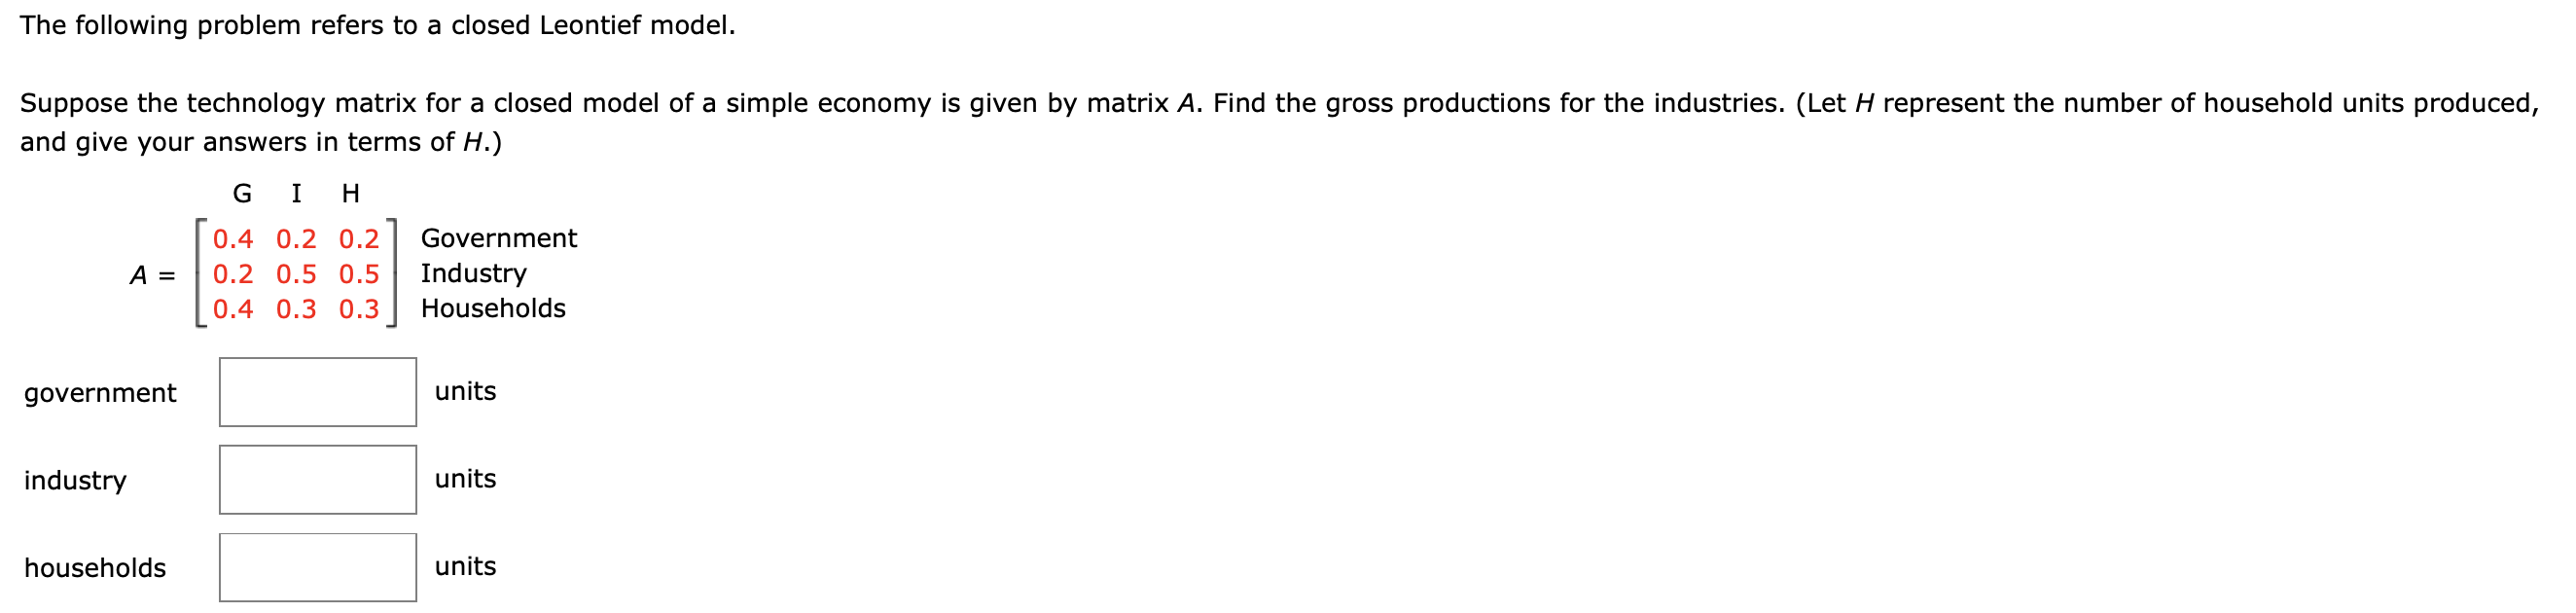 The following problem refers to a closed Leontief model
Suppose the technology matrix for a closed model of a simple economy is given by matrix A. Find the gross productions for the industries. (Let H represent the number of household units produced
and give your answers in terms of H.)
GI H
Government
0.4 0.2 0.2
Industry
A =
0.2 0.5 0.5
Households
0.4 0.3 0.3
units
government
industry
units
units
households
